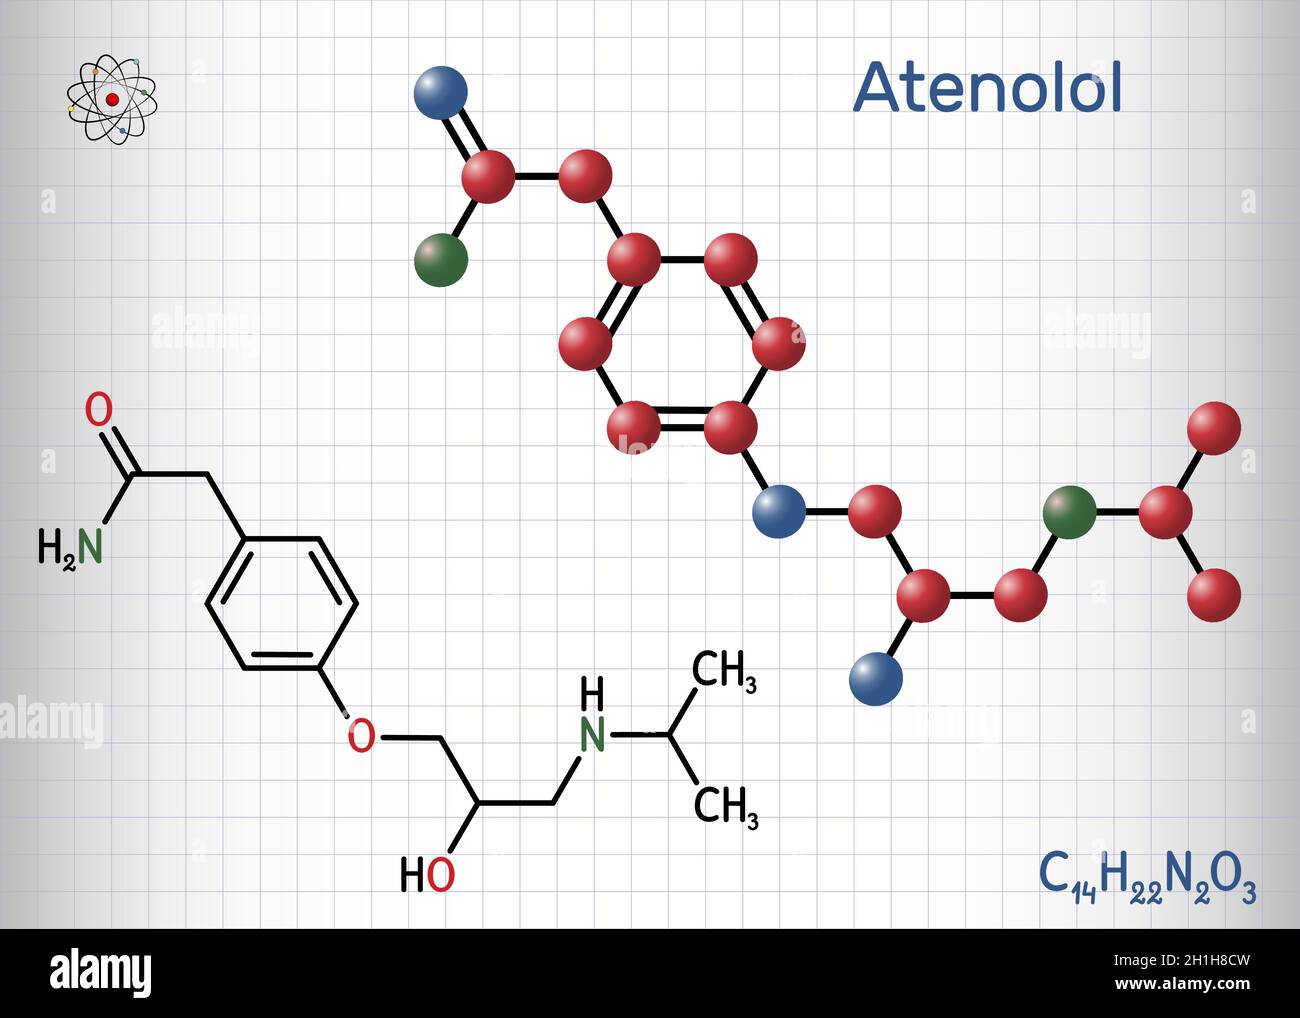 Atenolol cardioselective beta-blocker molecule. It is antihypertensive, hypotensive and antiarrhythmic drug. Structural chemical formula and molecule Stock Vector